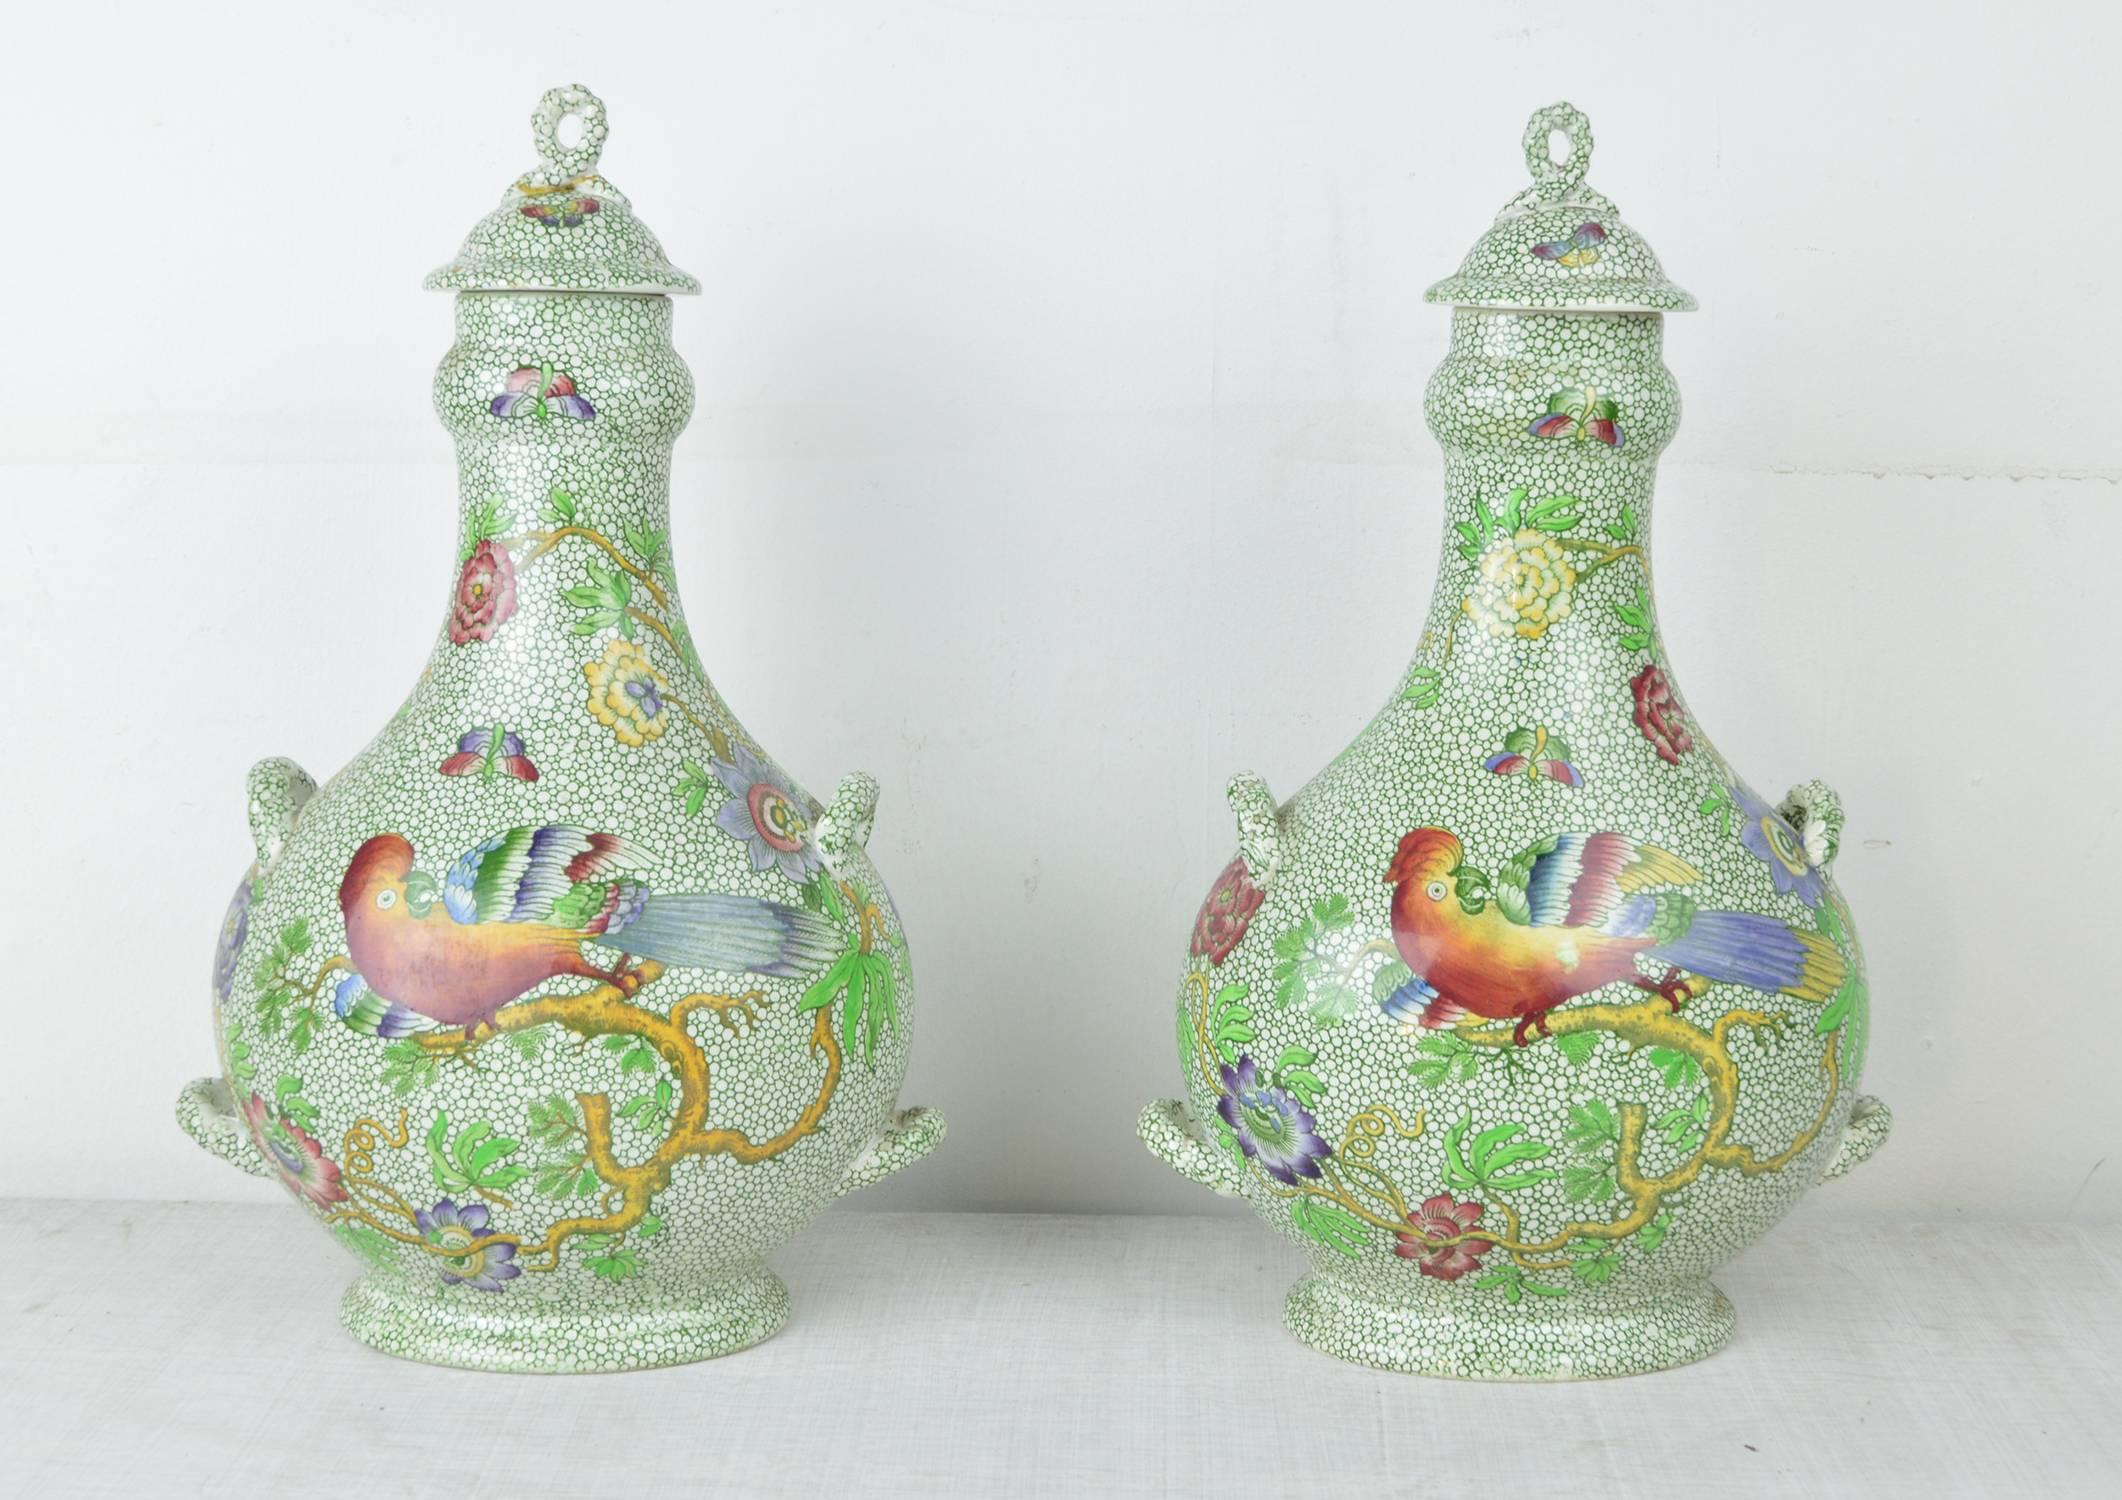 Fabulous pair of cover vases in a classic chintz pattern.

Transfer printed green background surmounted by wonderful exotic asiatic birds, flowers and butterflies.

Makers mark of Copeland Spode on the underside.

One of the finials has an old